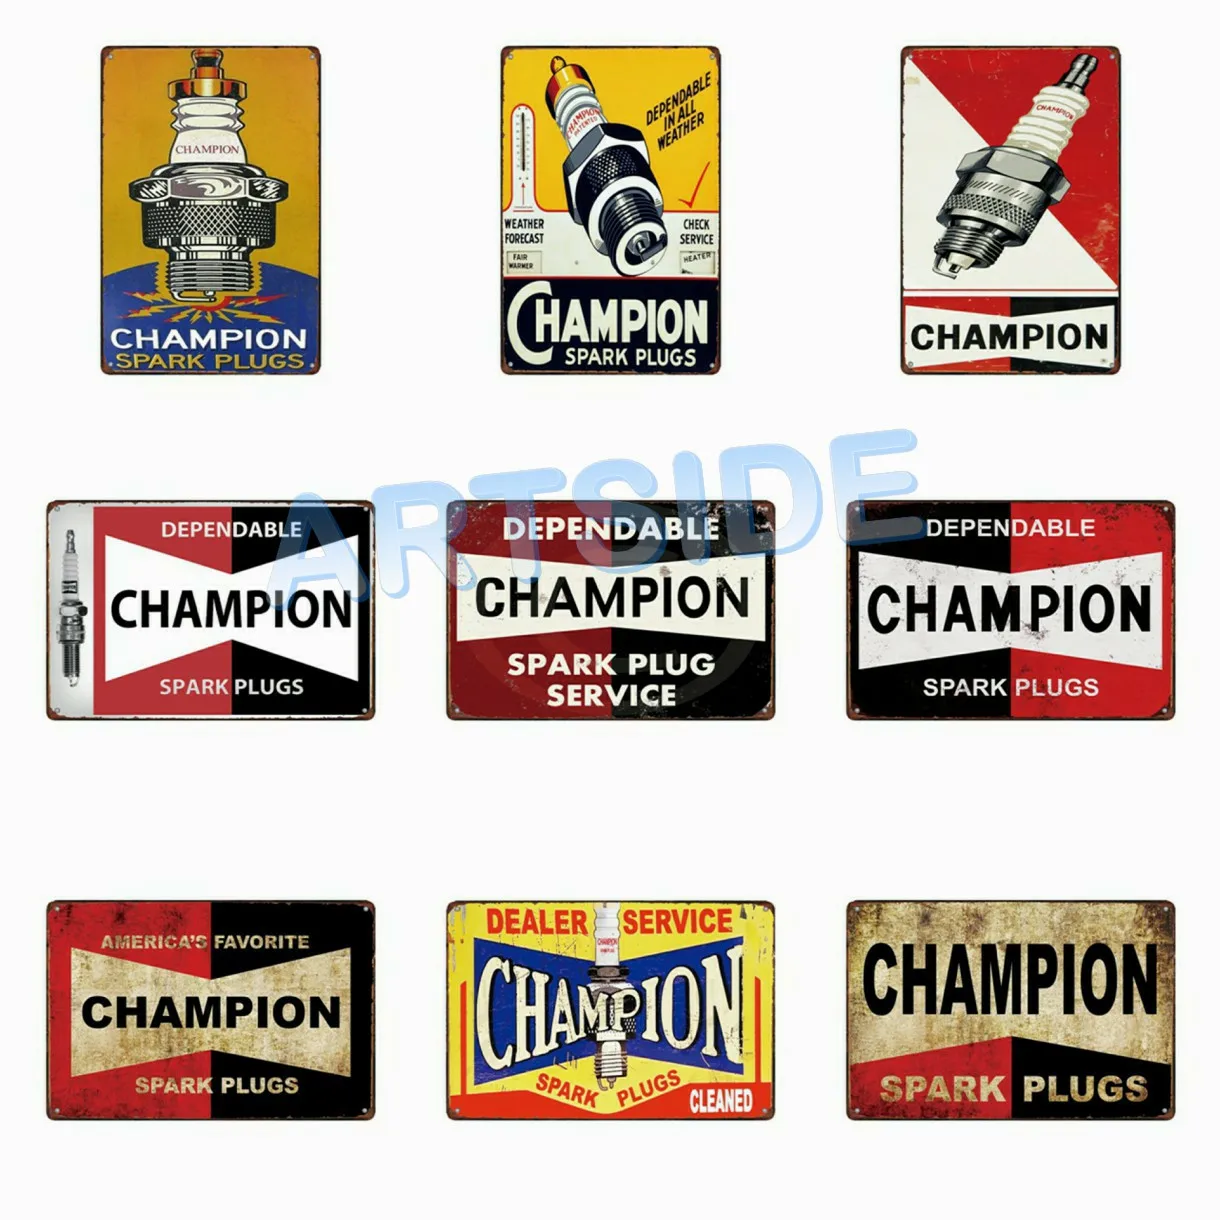 CHAMPION SPARK PLUGS  'More power more speed'  RUSTIC TIN SIGN 30 x 45 cm  